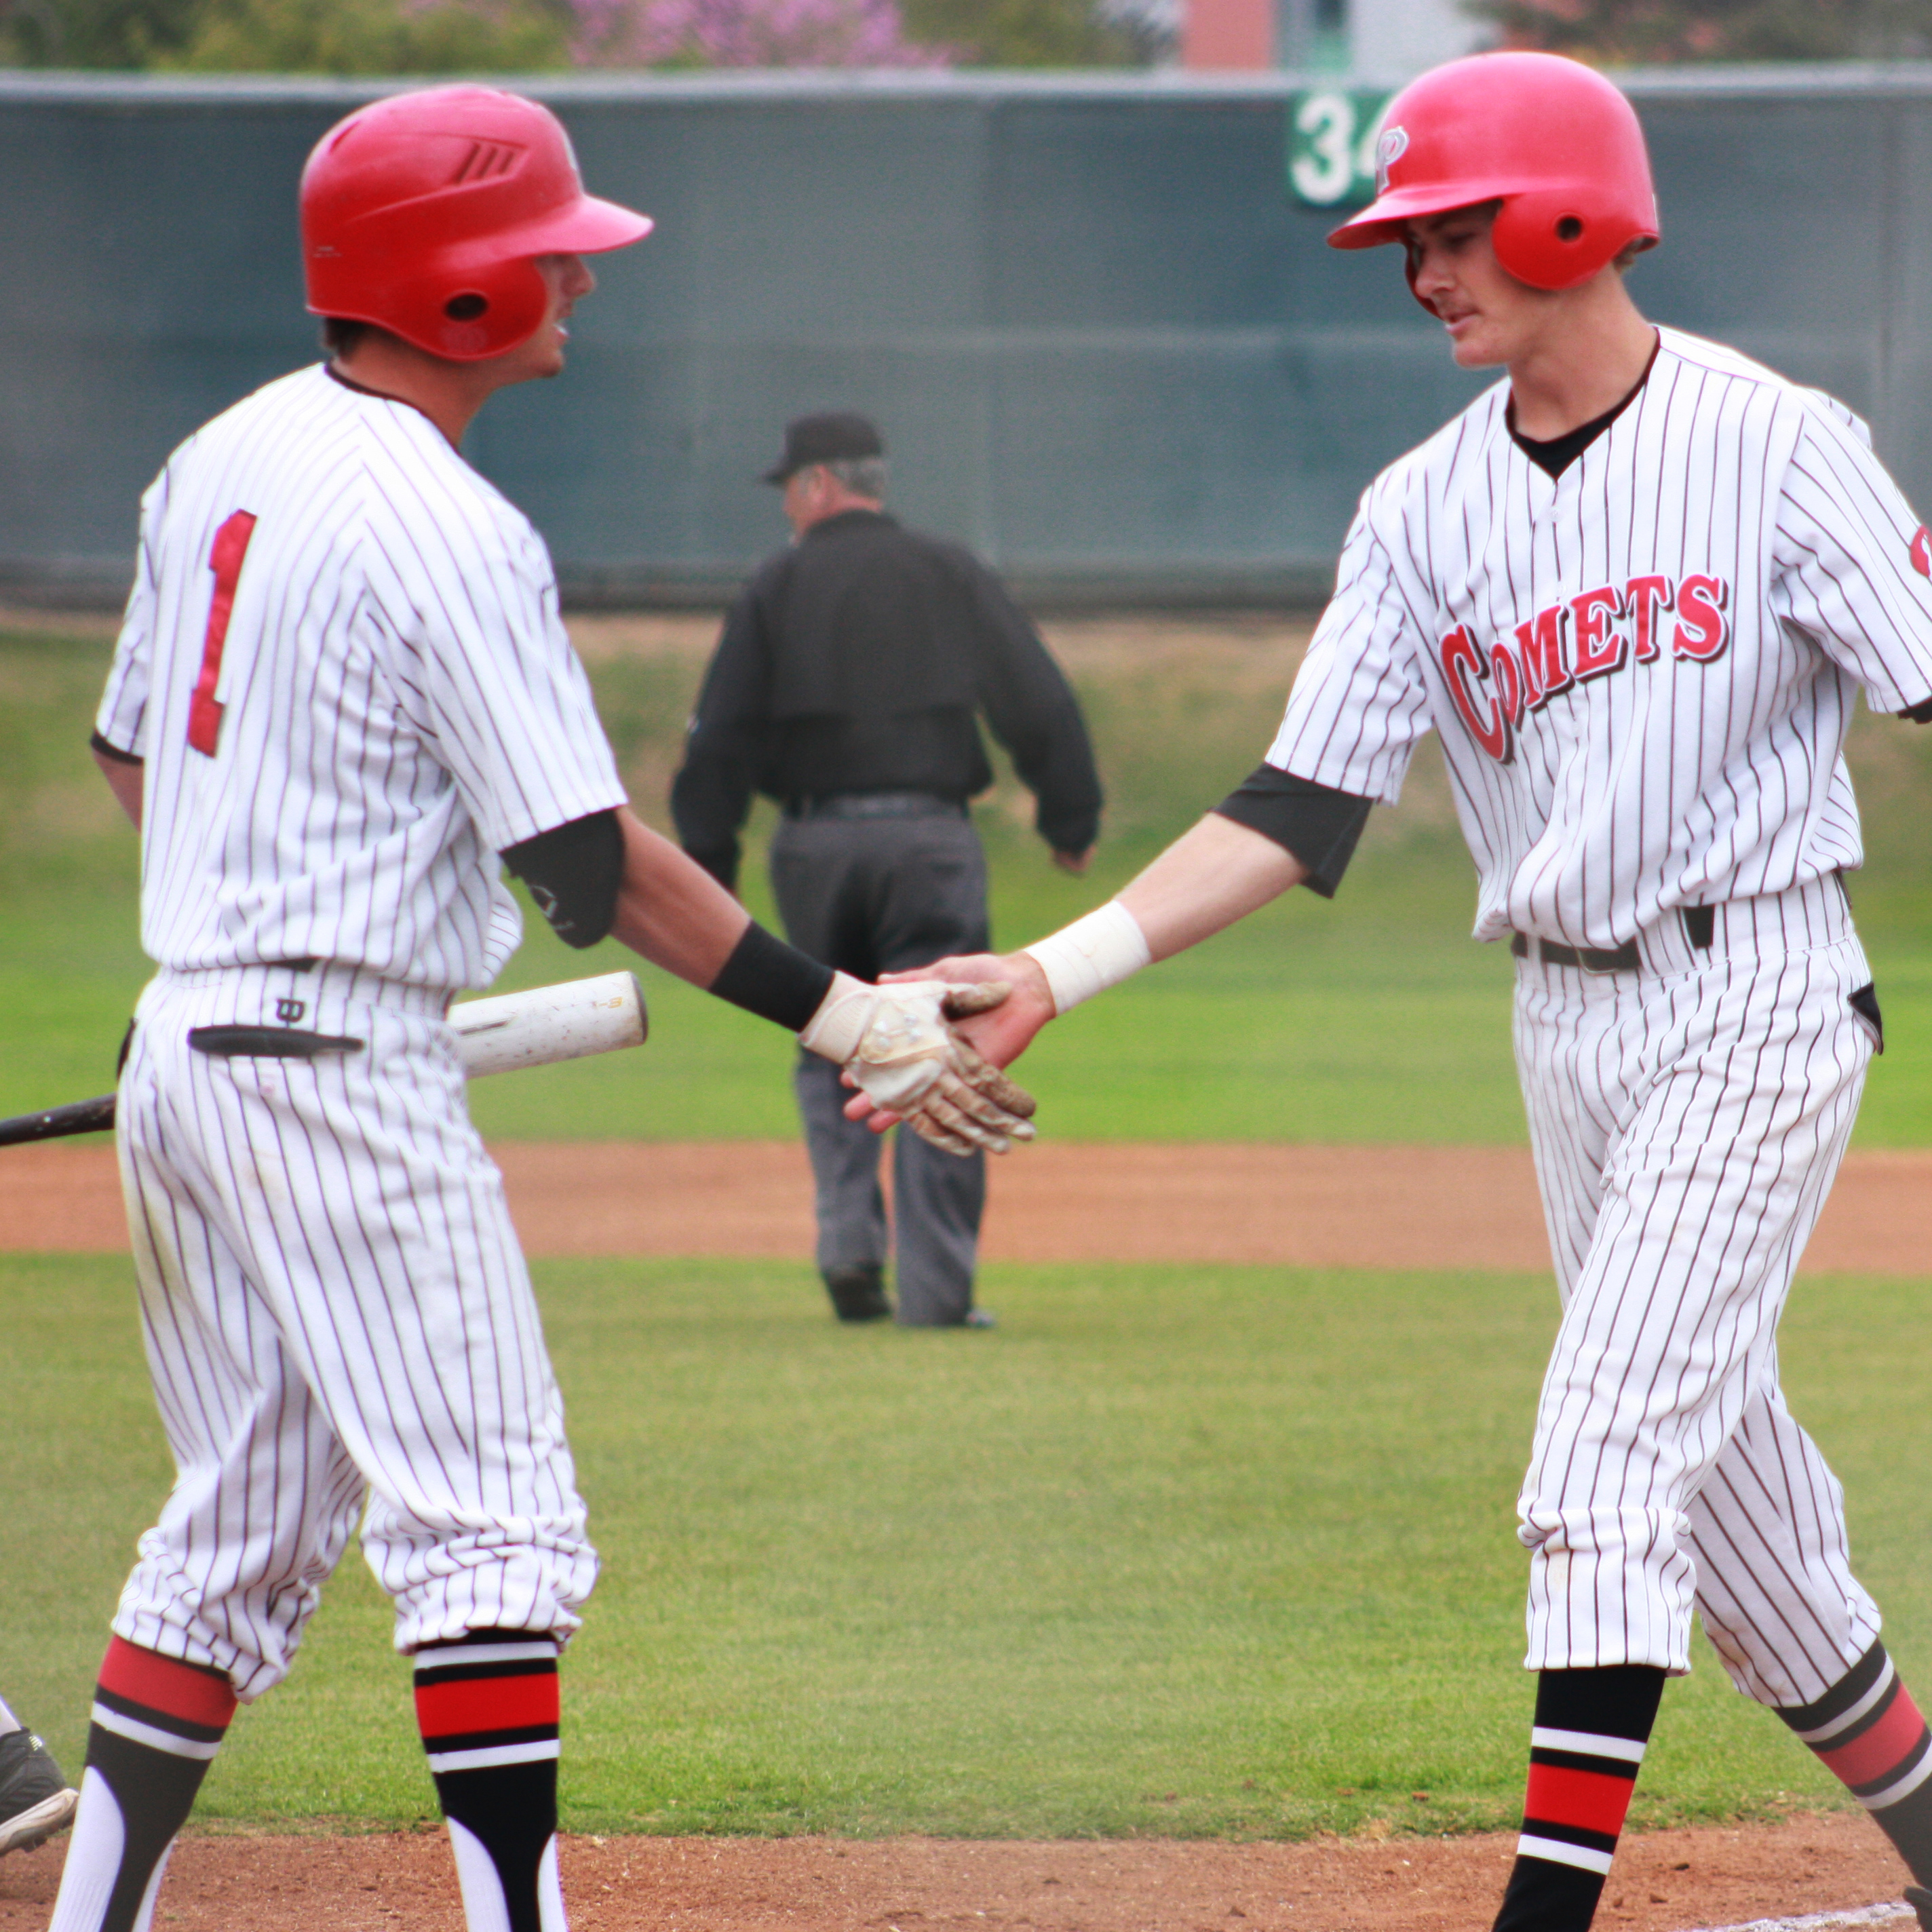 Two Palomar baseball players shake hands on the one on the right walks toward the player on the left. An umpire walks away from them in the background.